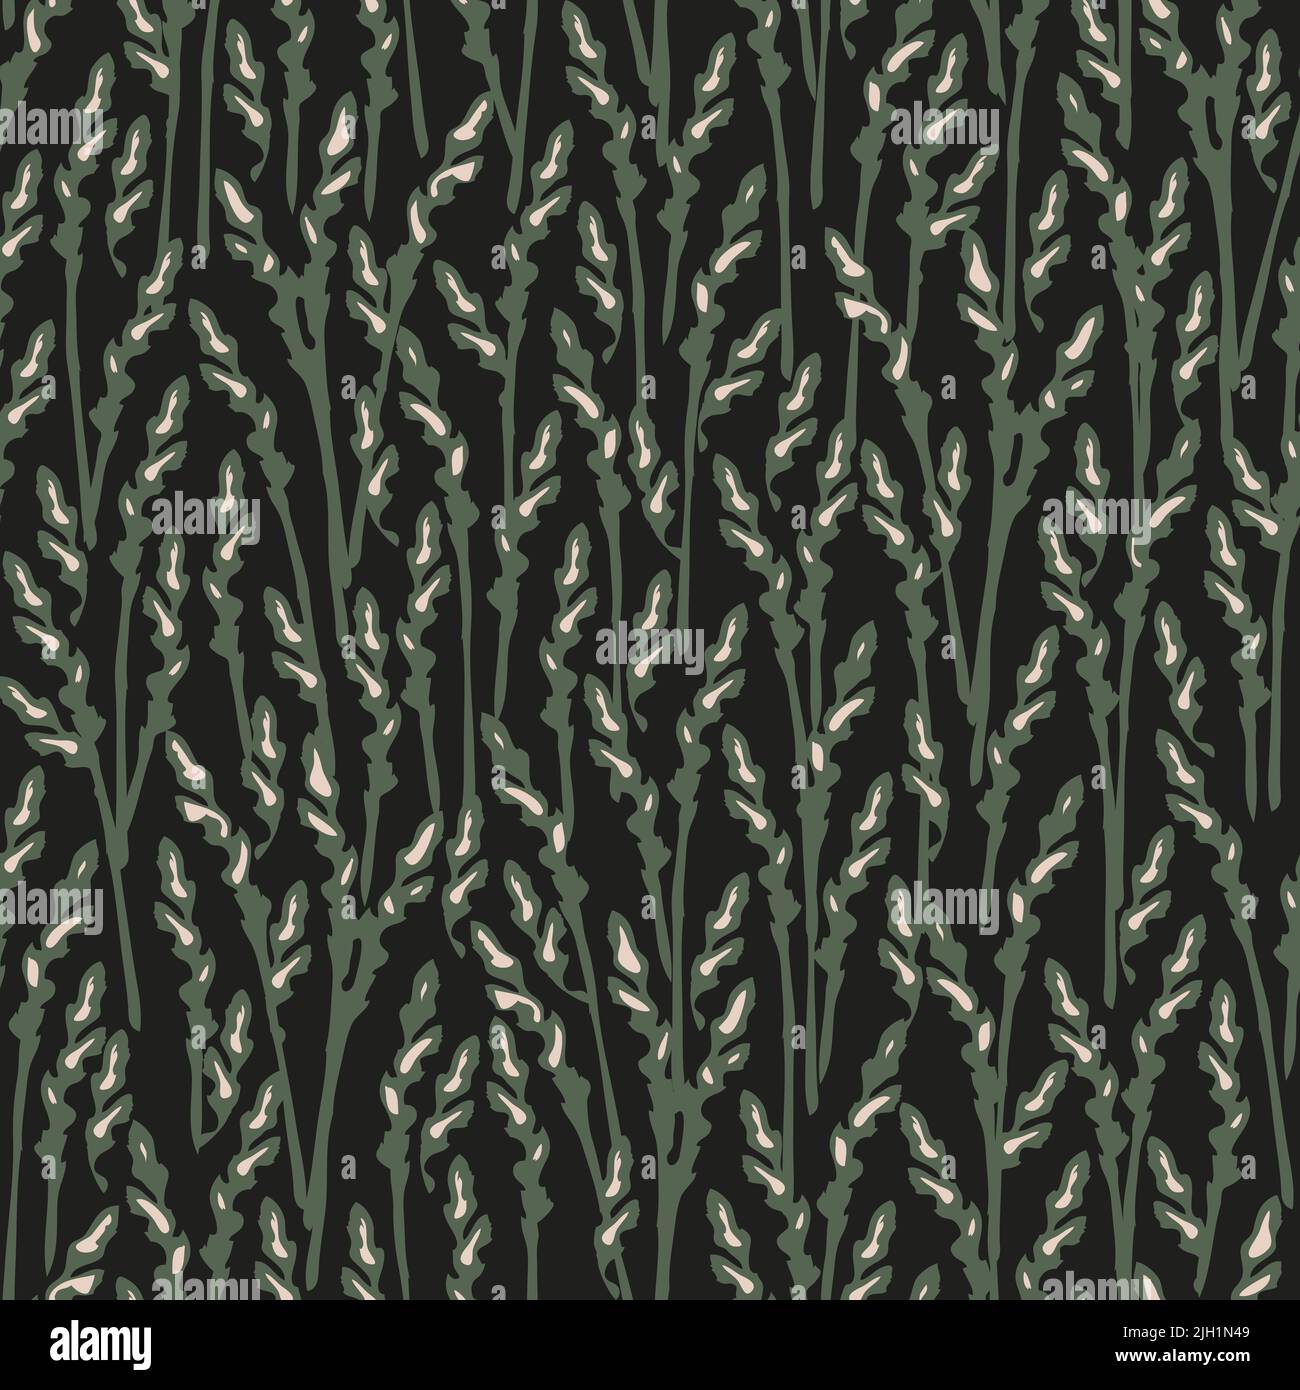 Seamless vector pattern with grass meadow on black background. Decorative rye texture wallpaper design. Grain field fashion textile. Stock Vector